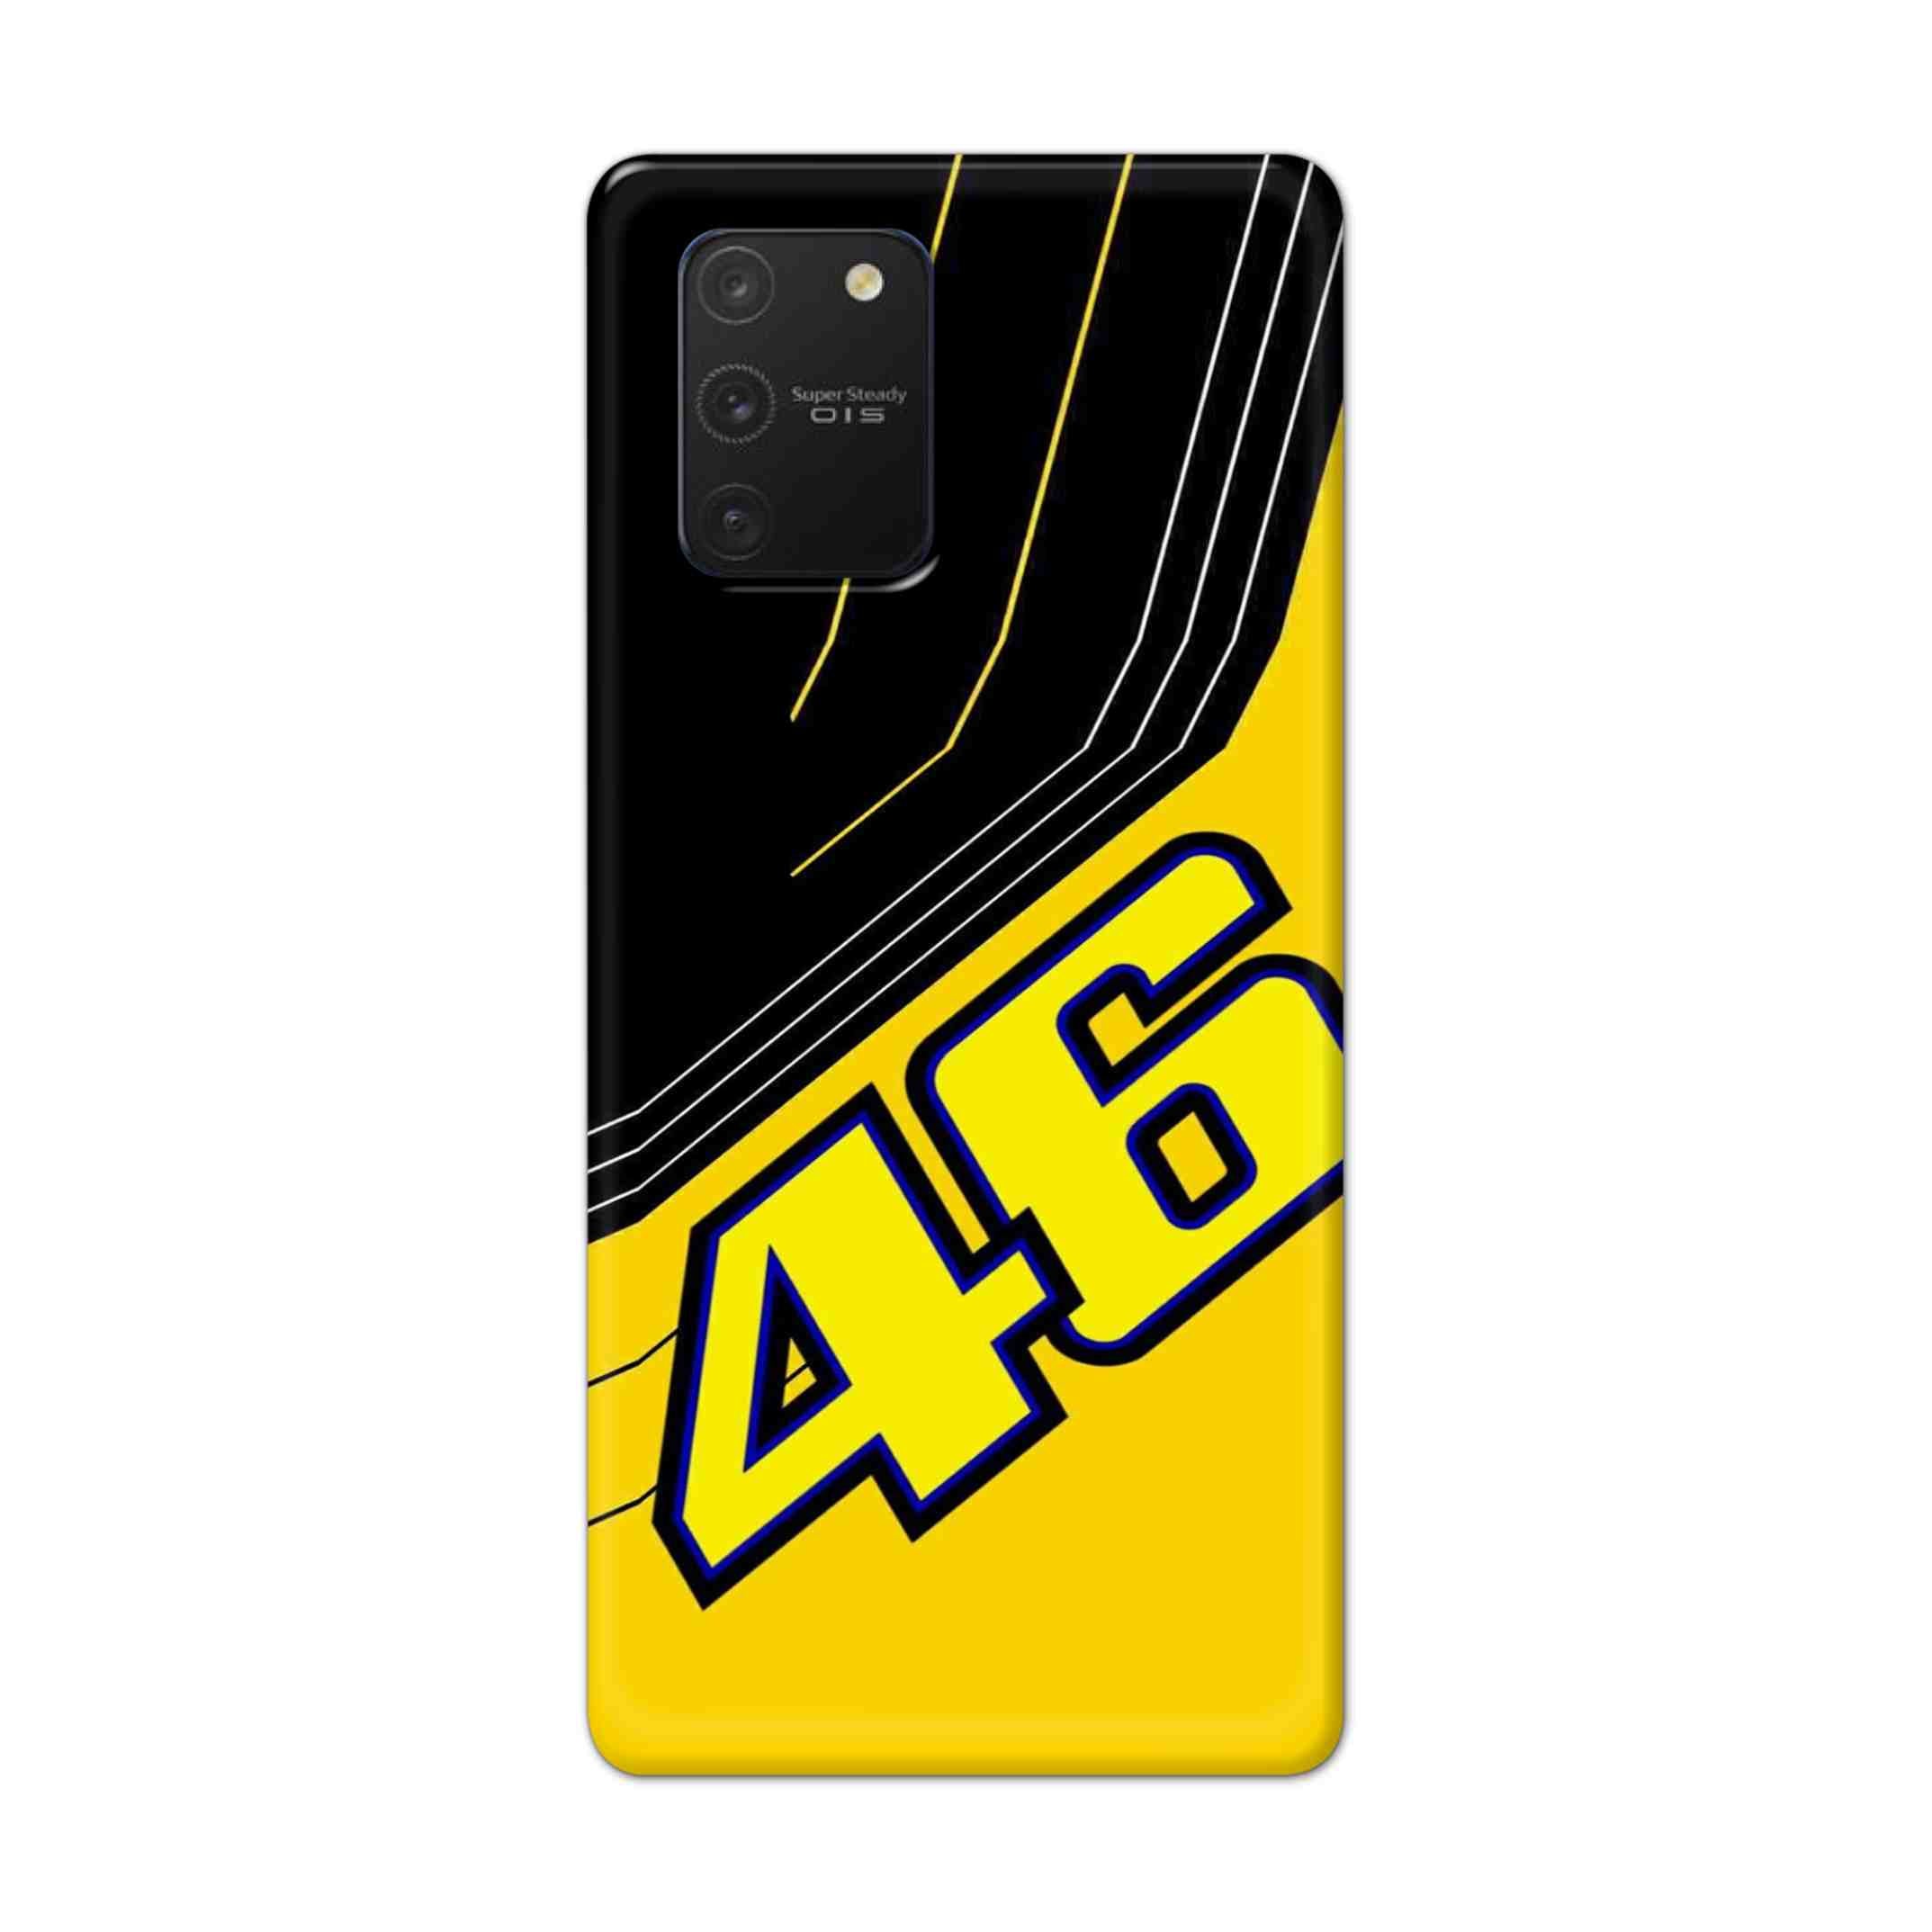 Buy 46 Hard Back Mobile Phone Case Cover For Samsung Galaxy S10 Lite Online